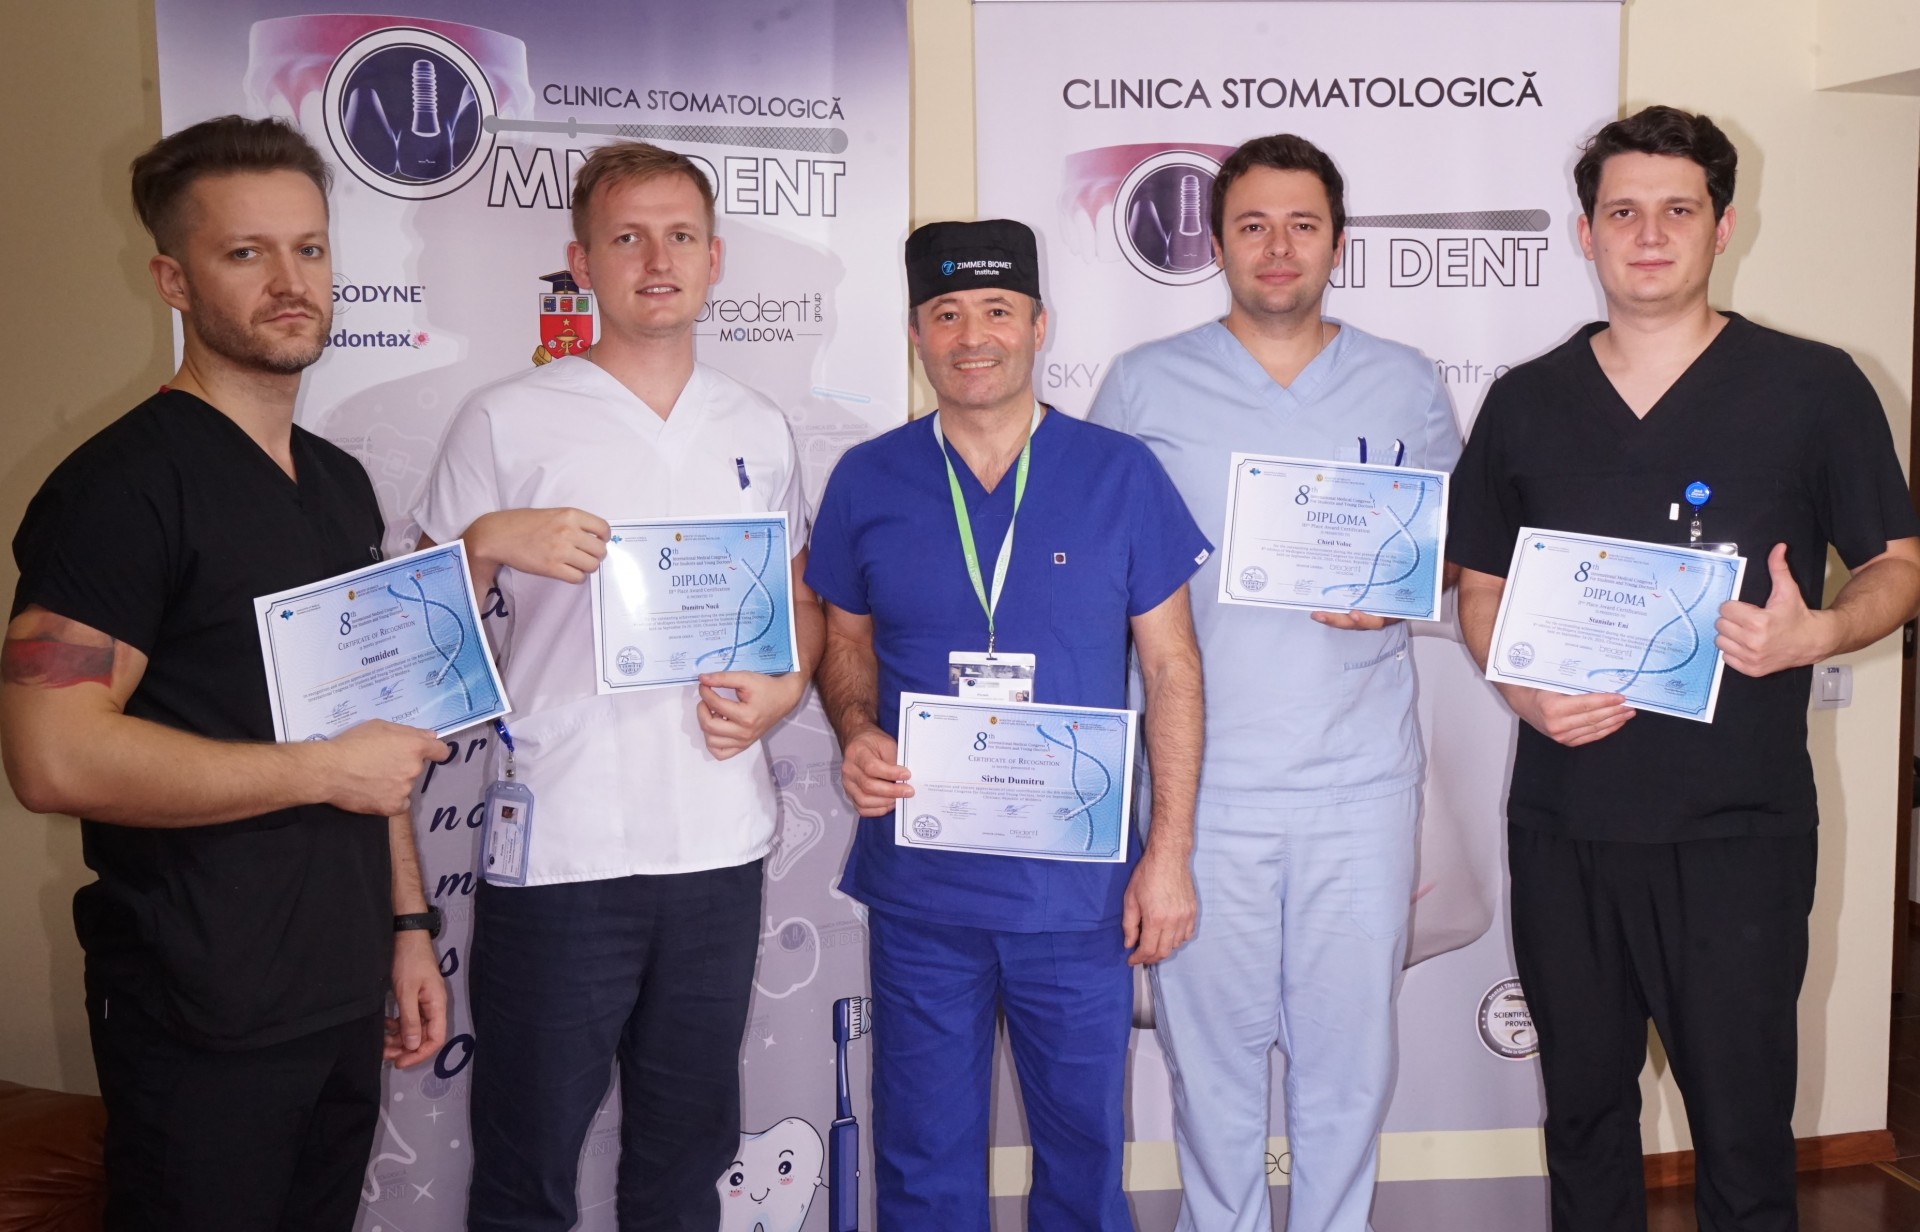 3 doctors from the “Omni Dent” Dental Clinic were awarded at the MedEspera 2020 International Congress